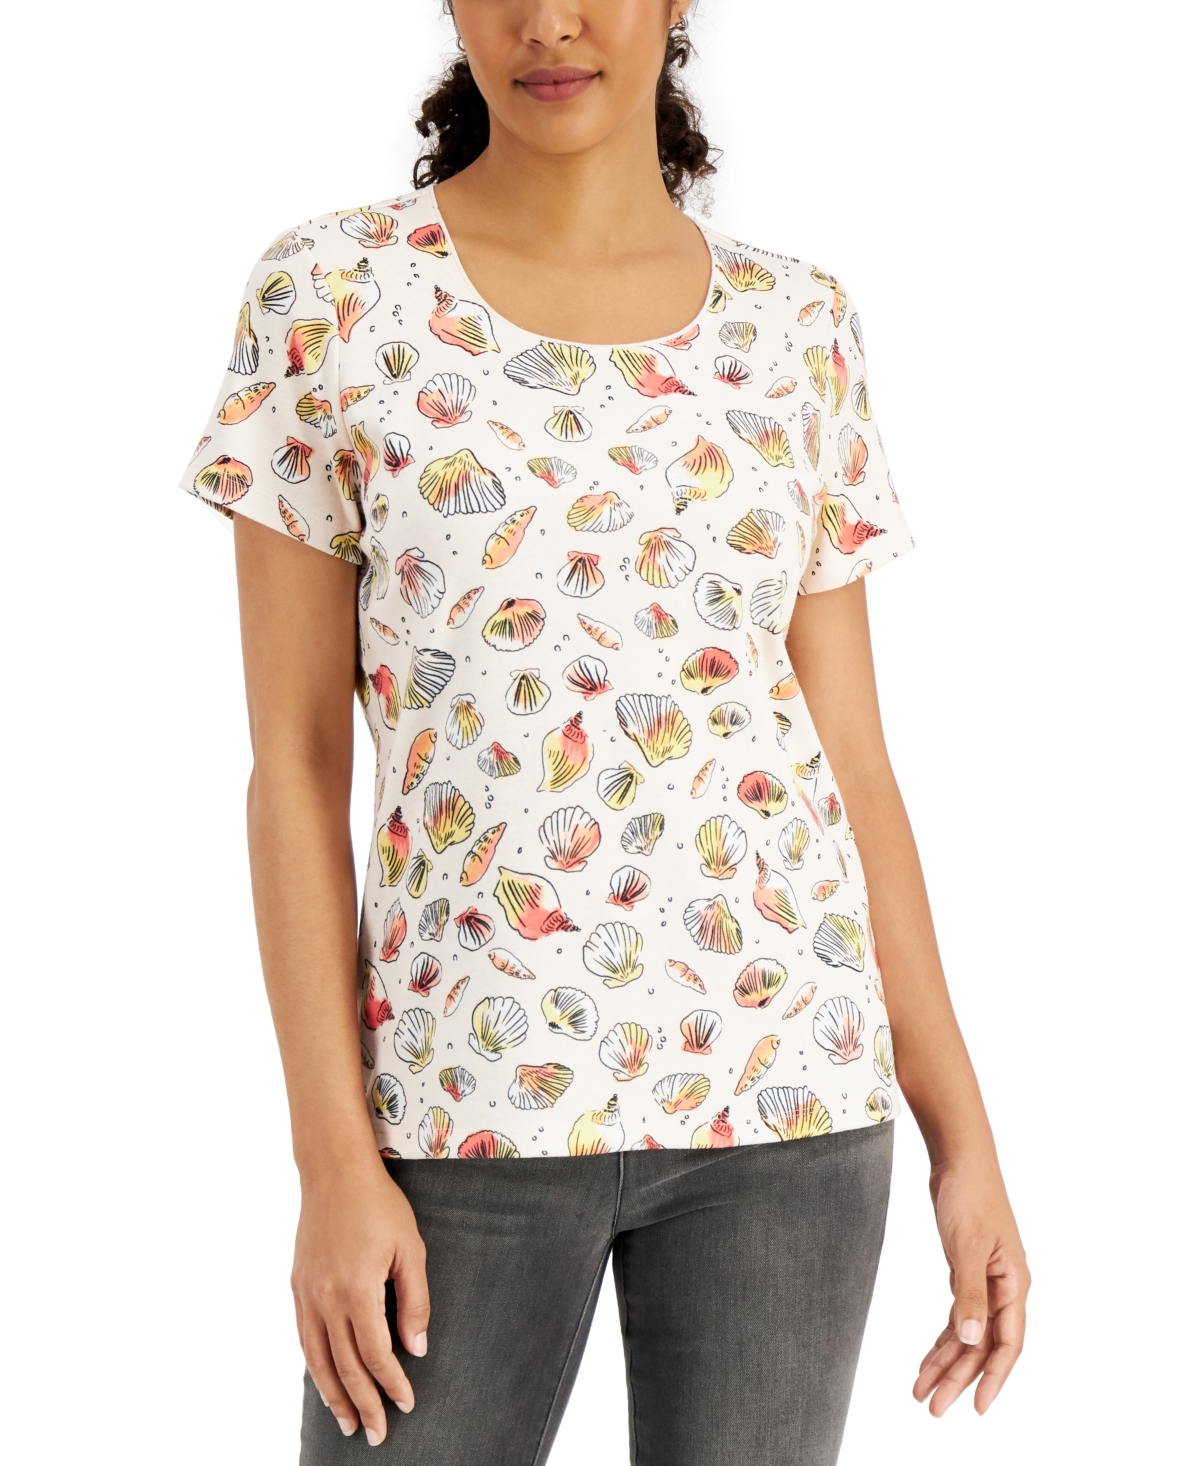 Petite Cotton Shell We Dance Top, Created for Macy's - Blush